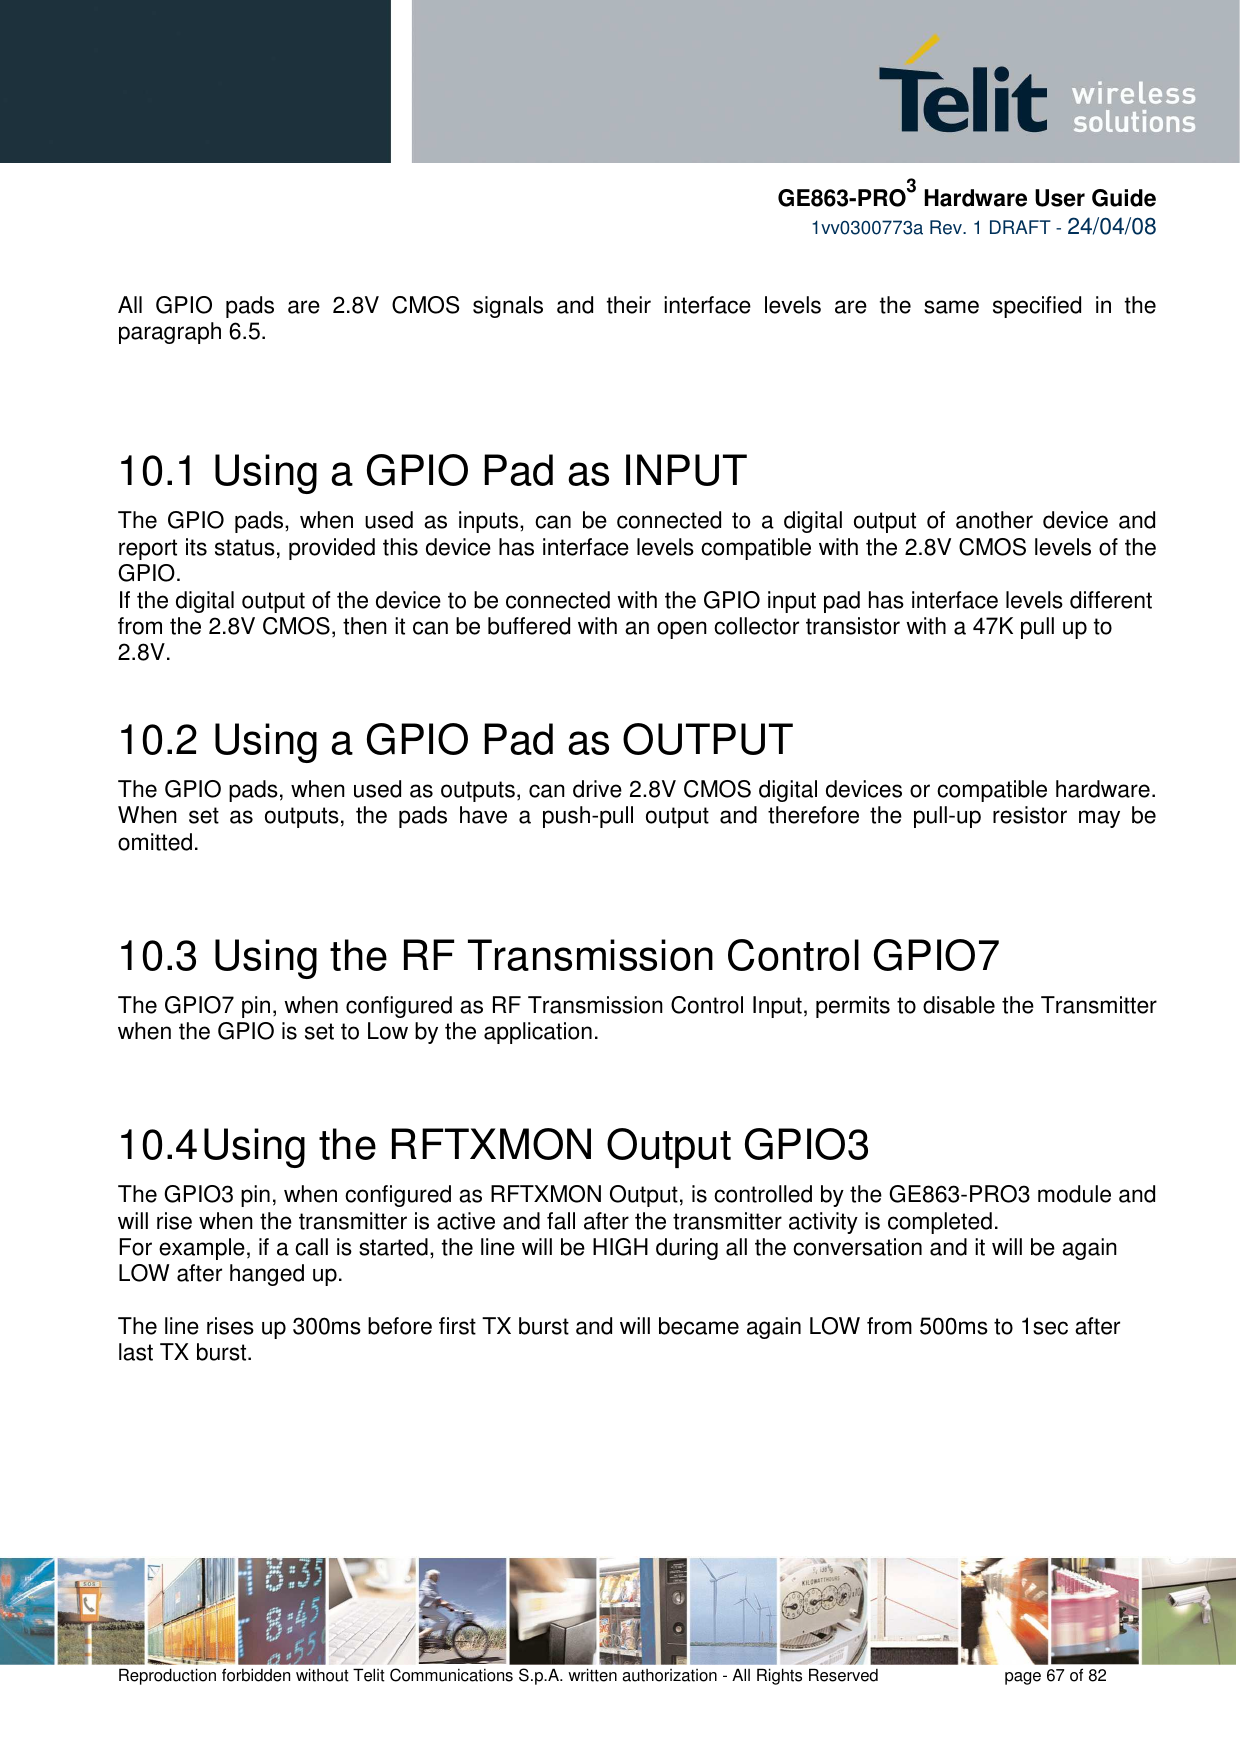     GE863-PRO3 Hardware User Guide  1vv0300773a Rev. 1 DRAFT - 24/04/08    Reproduction forbidden without Telit Communications S.p.A. written authorization - All Rights Reserved    page 67 of 82    All  GPIO  pads  are  2.8V  CMOS  signals  and  their  interface  levels  are  the  same  specified  in  the paragraph 6.5.   10.1  Using a GPIO Pad as INPUT The GPIO pads,  when used  as  inputs, can be connected to a  digital  output of another device and report its status, provided this device has interface levels compatible with the 2.8V CMOS levels of the GPIO.  If the digital output of the device to be connected with the GPIO input pad has interface levels different from the 2.8V CMOS, then it can be buffered with an open collector transistor with a 47K pull up to 2.8V. 10.2  Using a GPIO Pad as OUTPUT The GPIO pads, when used as outputs, can drive 2.8V CMOS digital devices or compatible hardware. When  set  as  outputs,  the  pads  have  a  push-pull  output  and  therefore  the  pull-up  resistor  may  be omitted.  10.3  Using the RF Transmission Control GPIO7 The GPIO7 pin, when configured as RF Transmission Control Input, permits to disable the Transmitter when the GPIO is set to Low by the application.  10.4 Using the RFTXMON Output GPIO3 The GPIO3 pin, when configured as RFTXMON Output, is controlled by the GE863-PRO3 module and will rise when the transmitter is active and fall after the transmitter activity is completed. For example, if a call is started, the line will be HIGH during all the conversation and it will be again LOW after hanged up.  The line rises up 300ms before first TX burst and will became again LOW from 500ms to 1sec after last TX burst. 